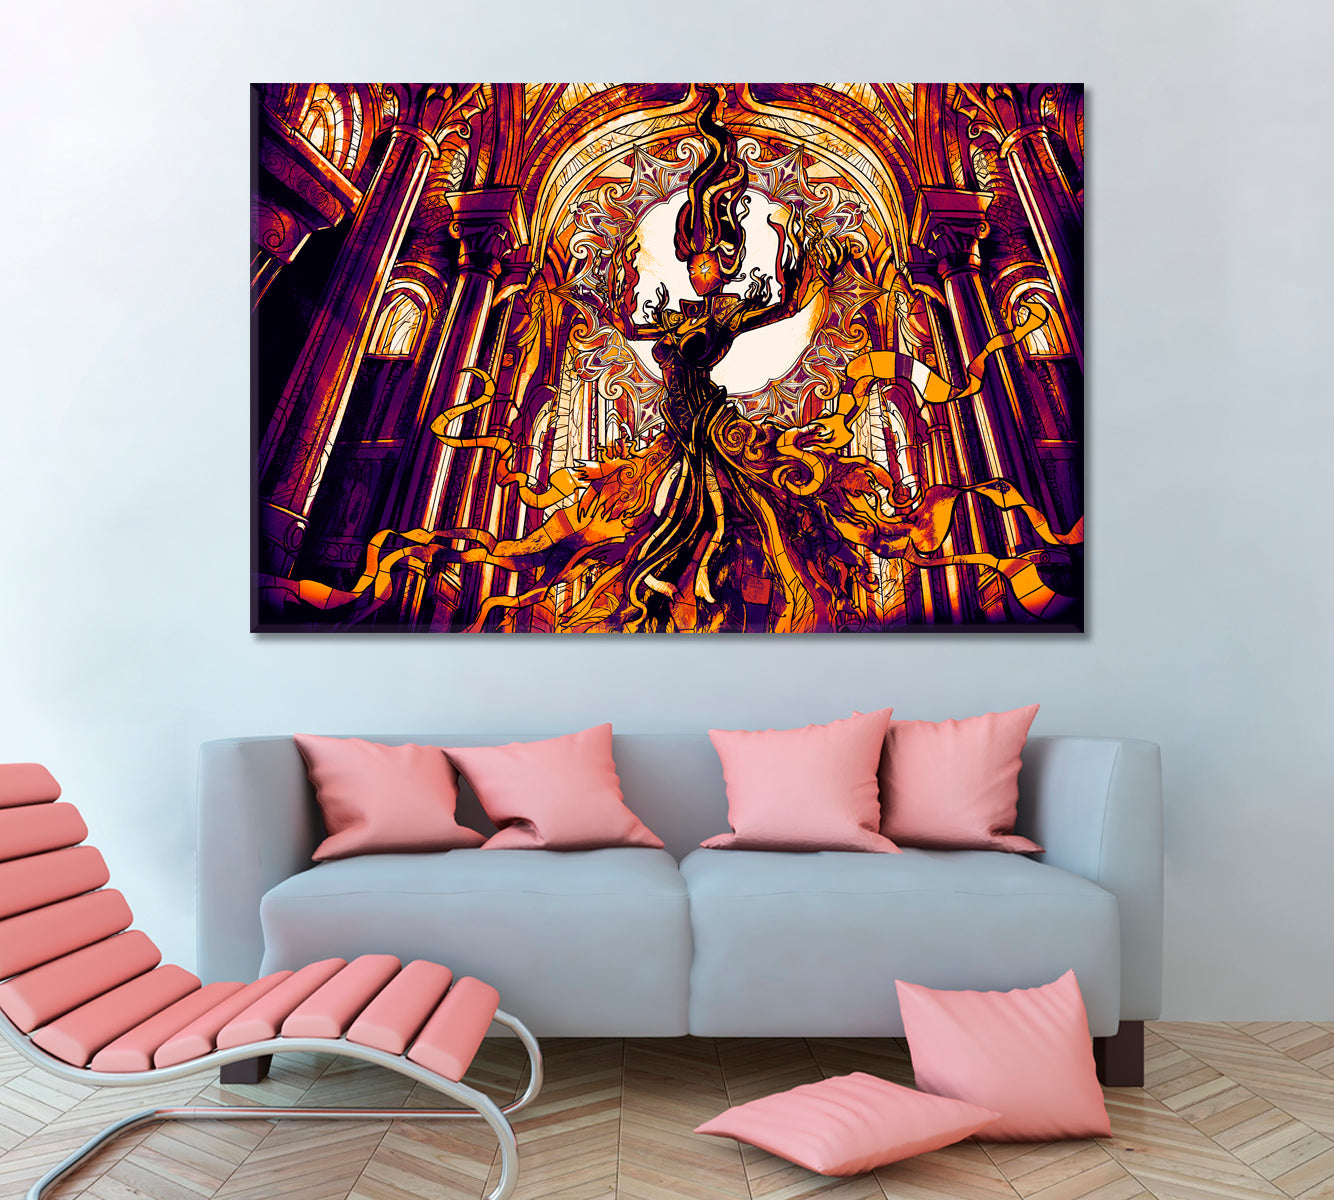 FANTASY Girl Hovers Majestic Cathedral Surreal Fantasy Large Art Print Décor Artesty 1 panel 24" x 16" 